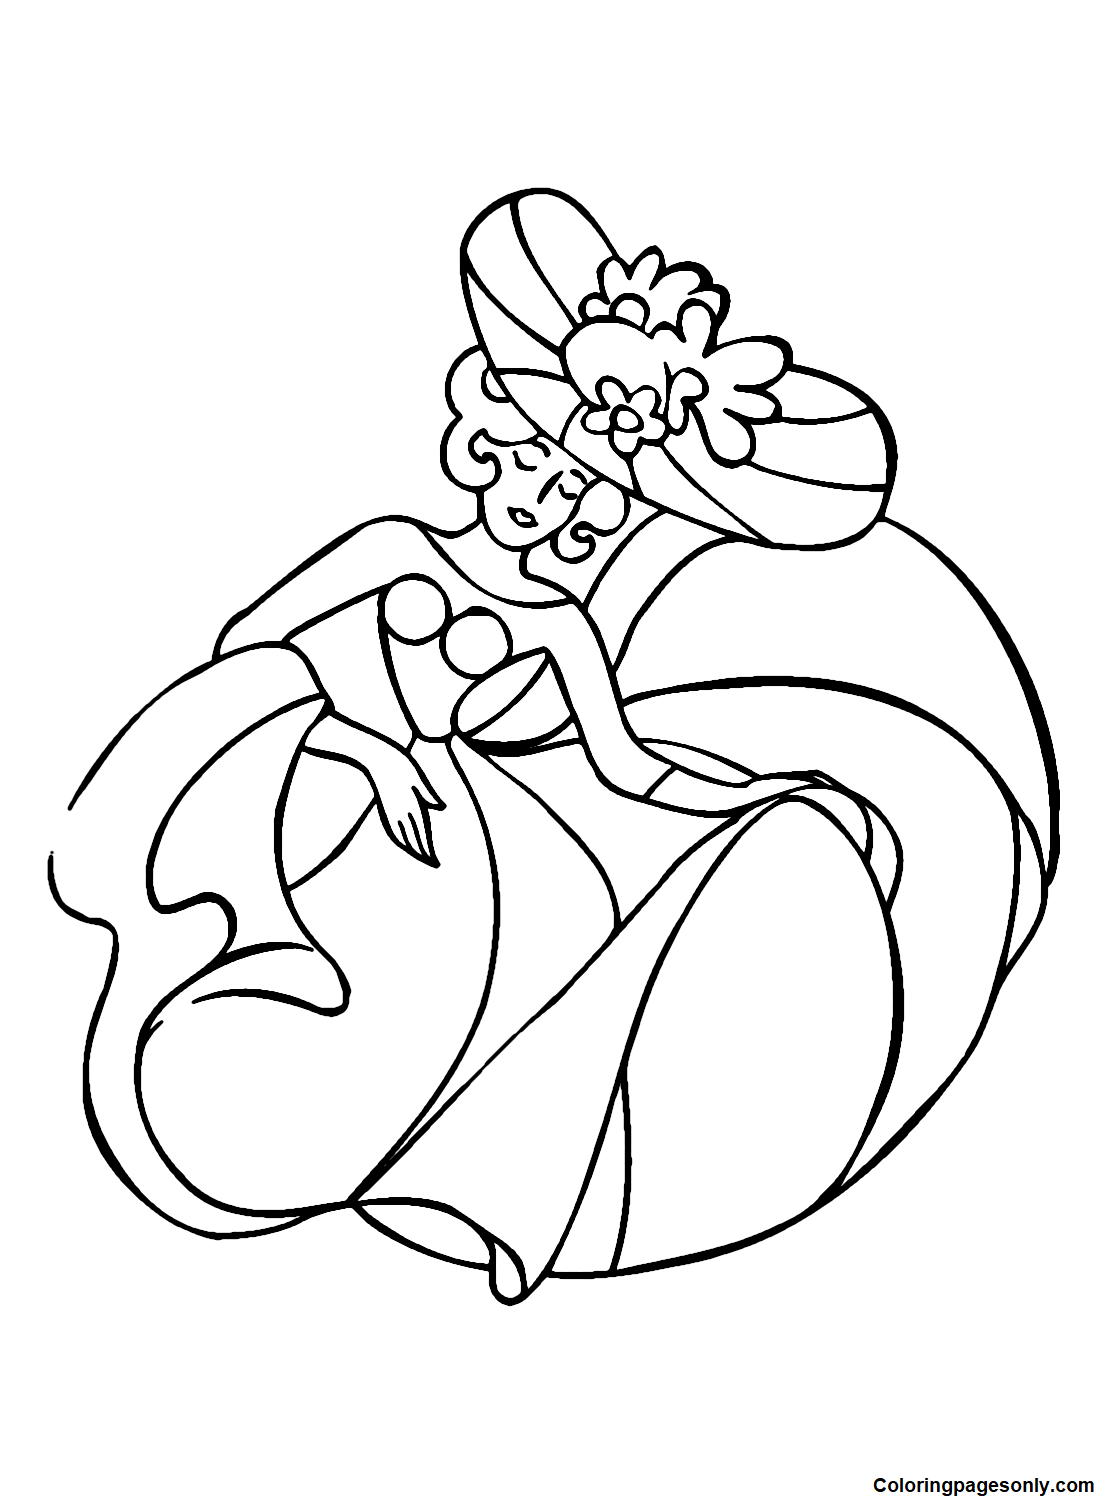 Dancing Pictures Coloring Pages